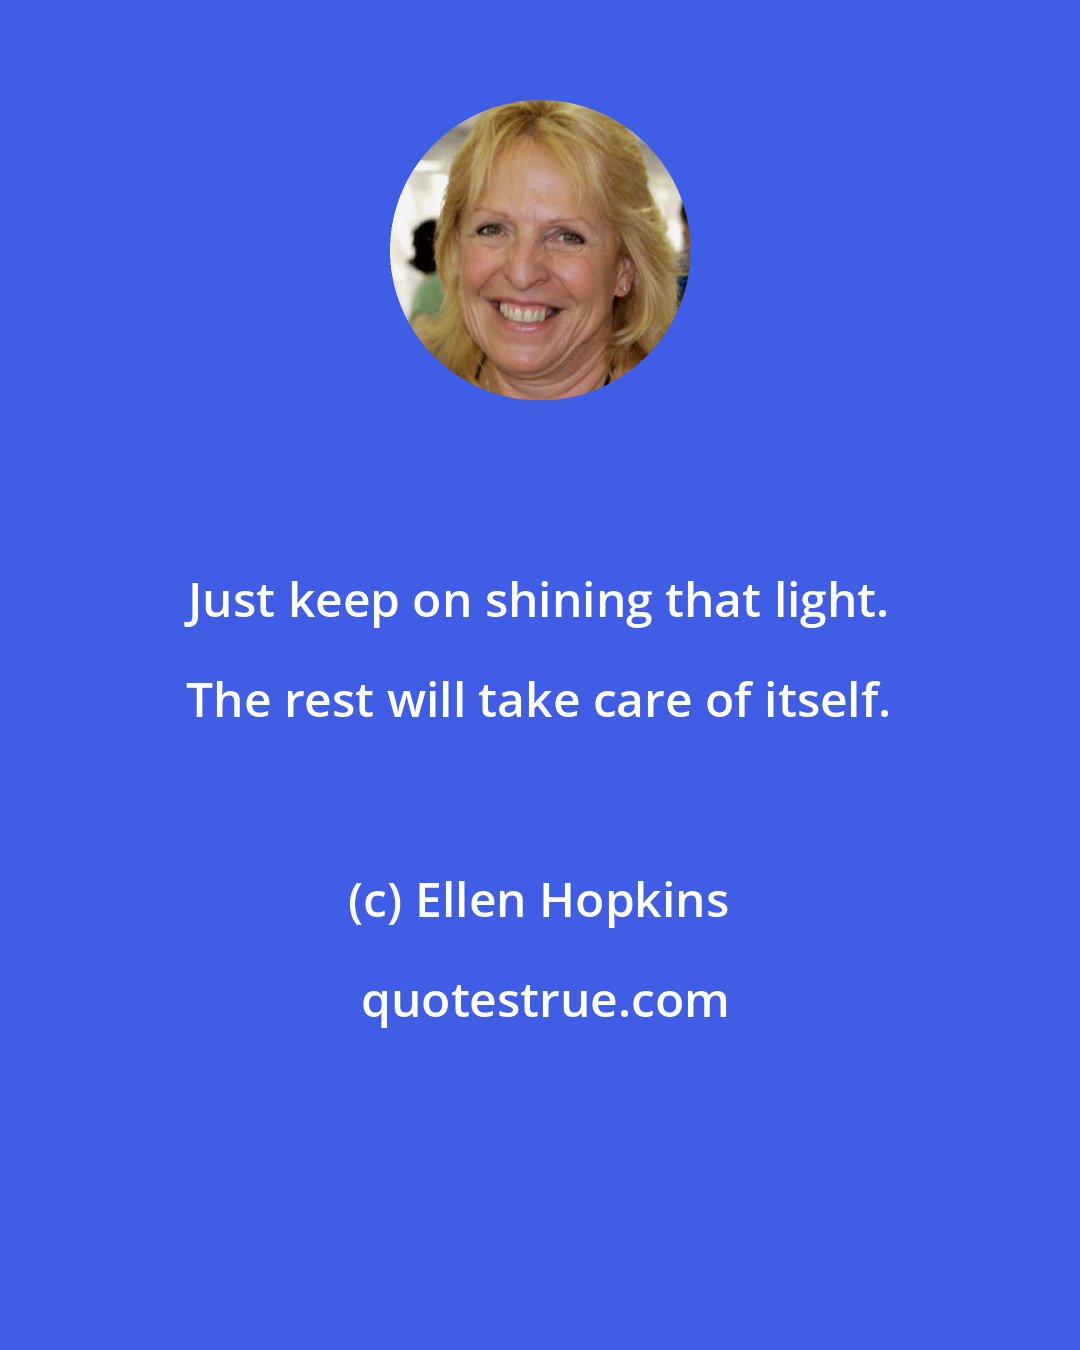 Ellen Hopkins: Just keep on shining that light. The rest will take care of itself.